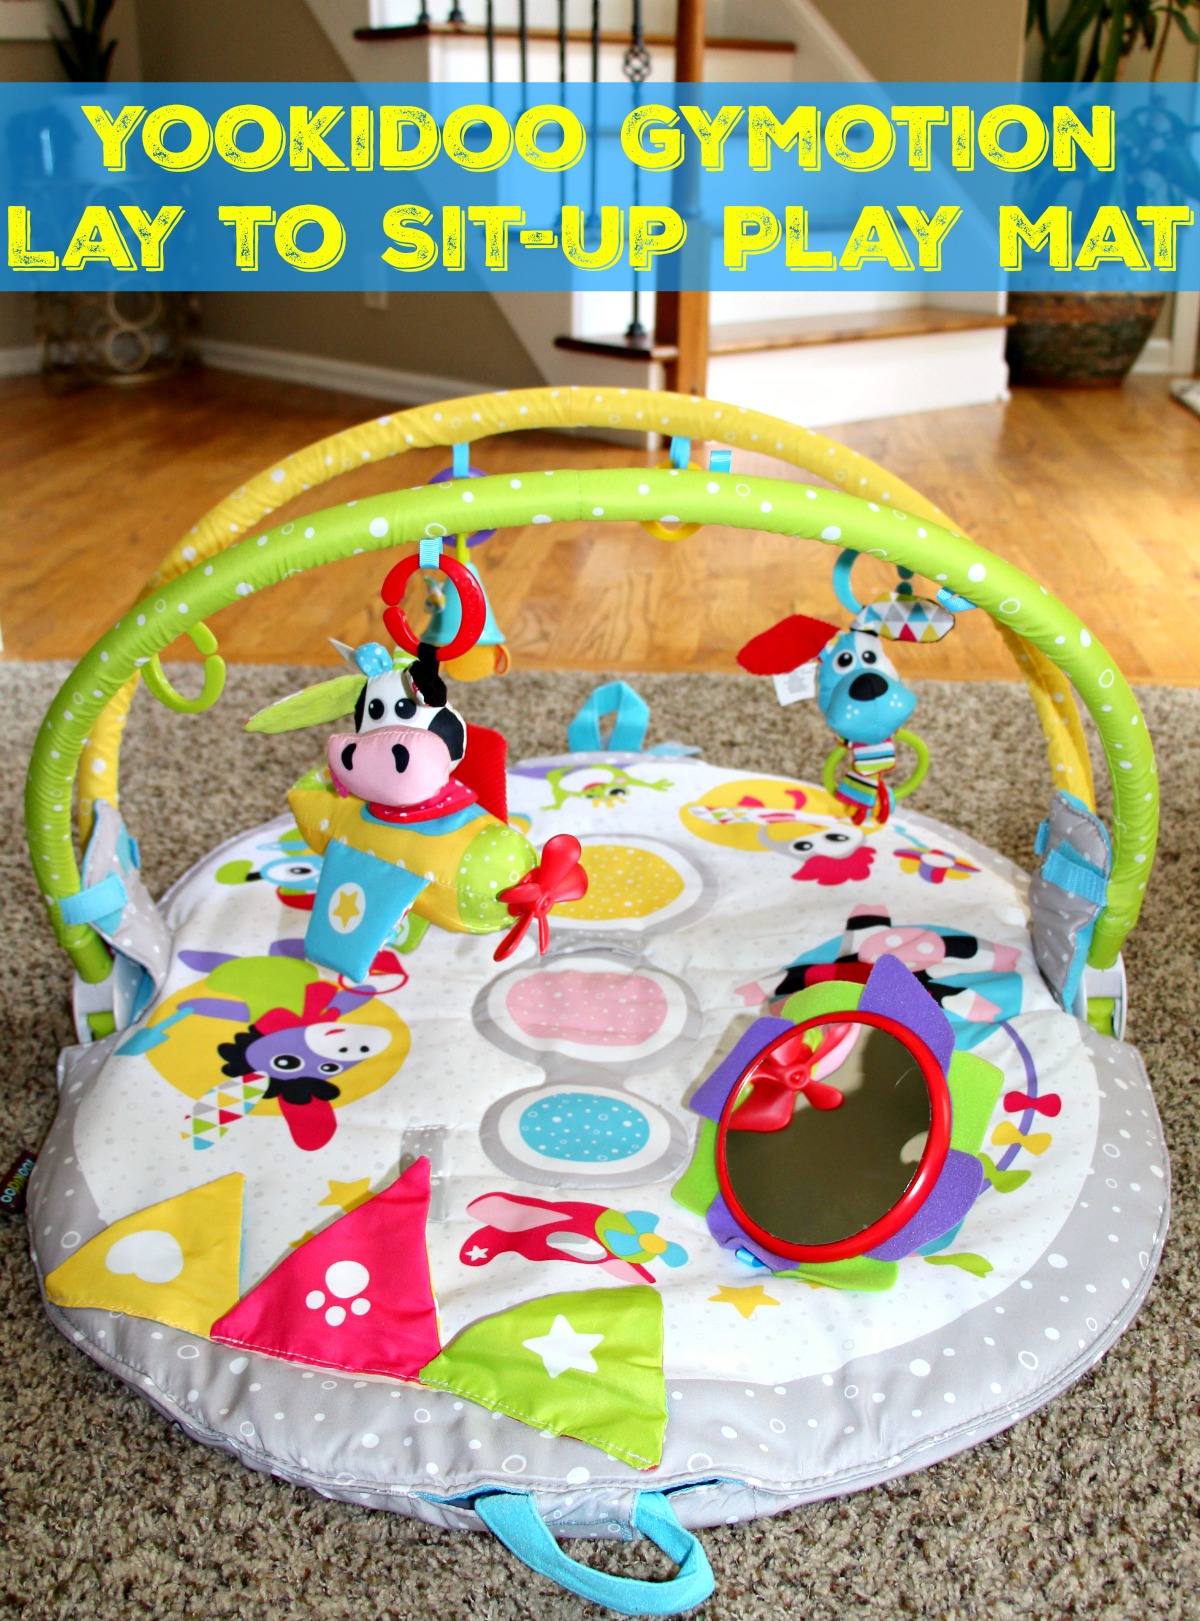 Yookidoo Gymotion Lay to Sit-Up Play Mat